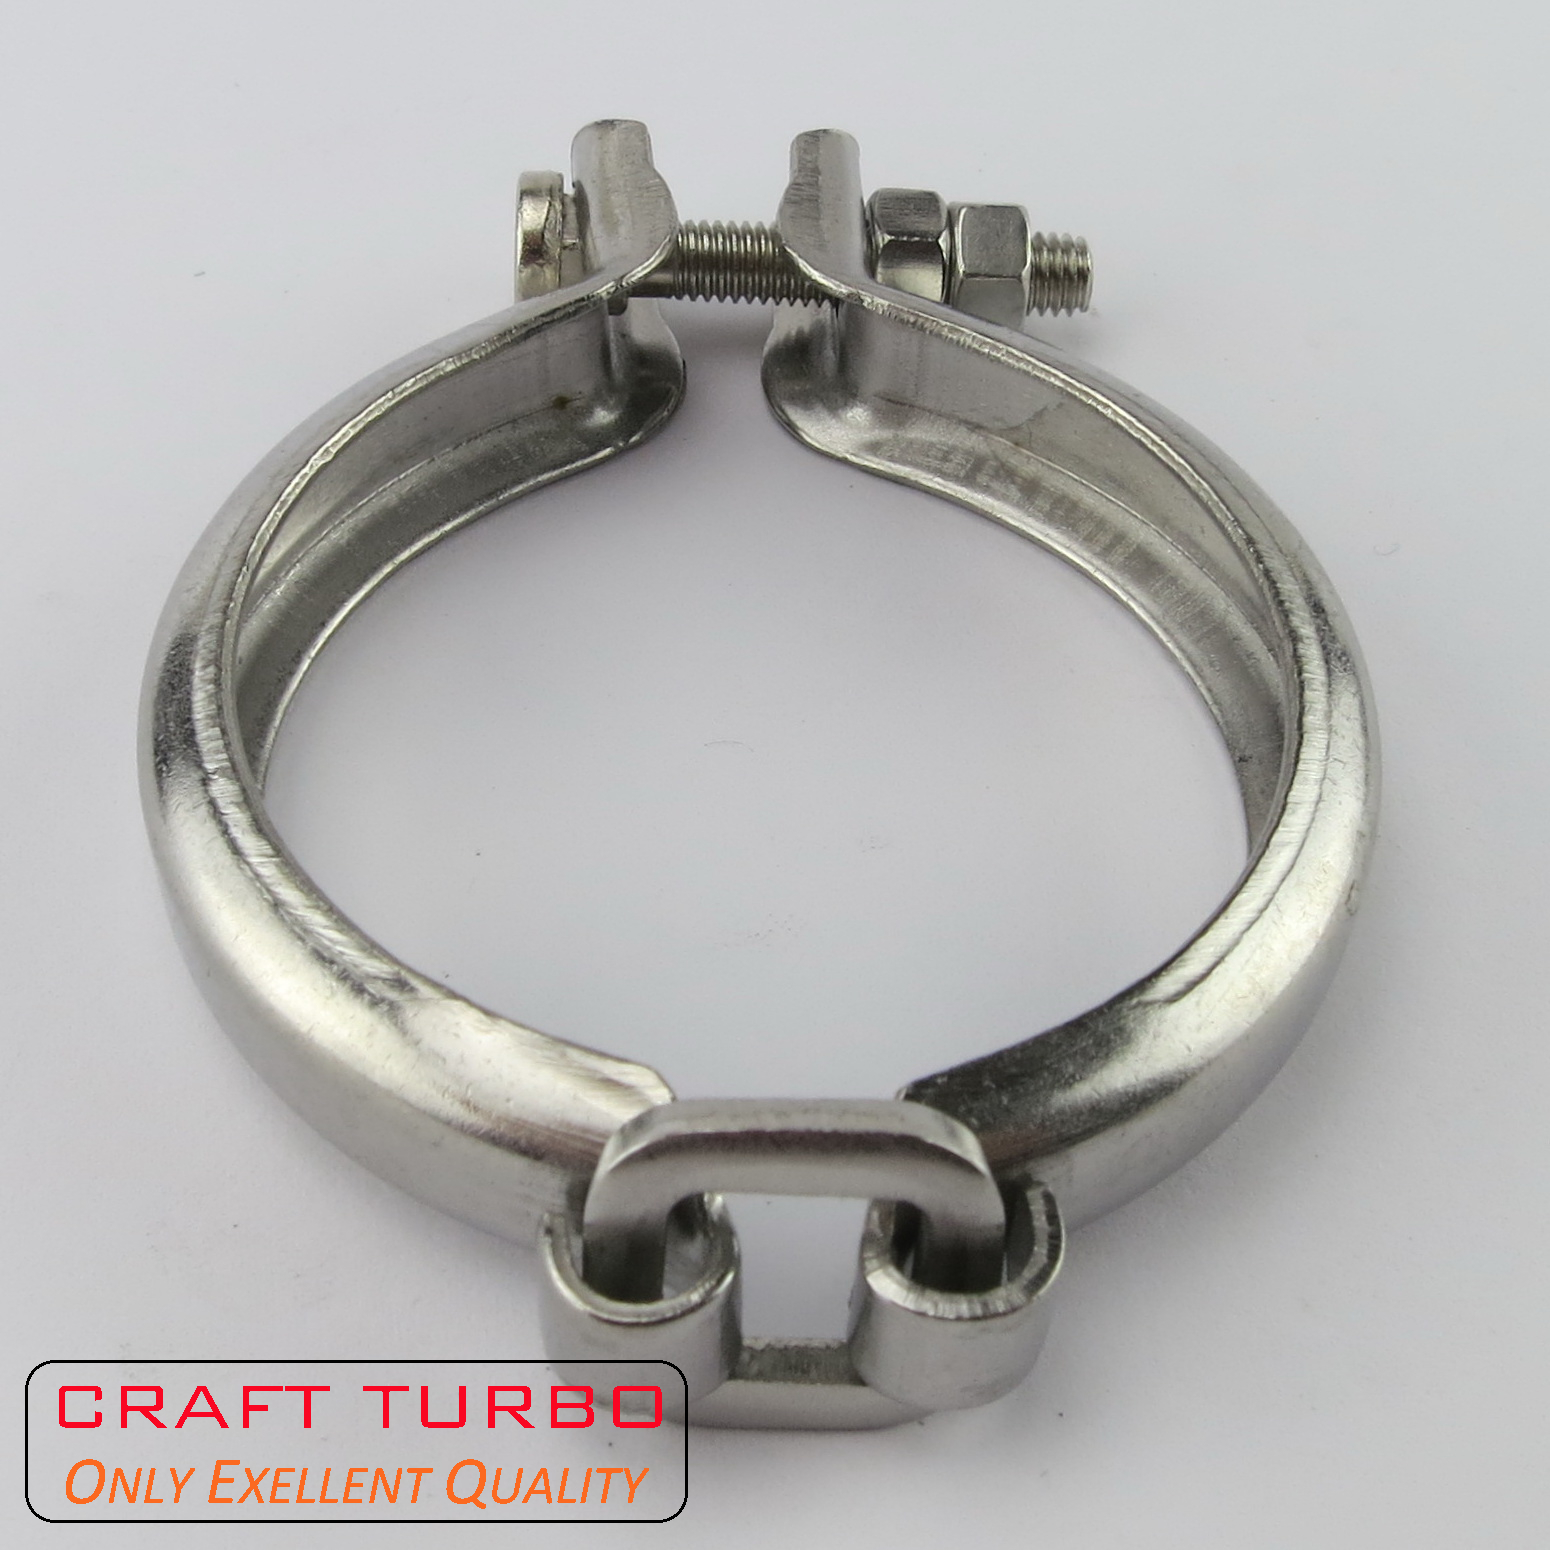 ∅58 V Band Clamps for Turbocharger